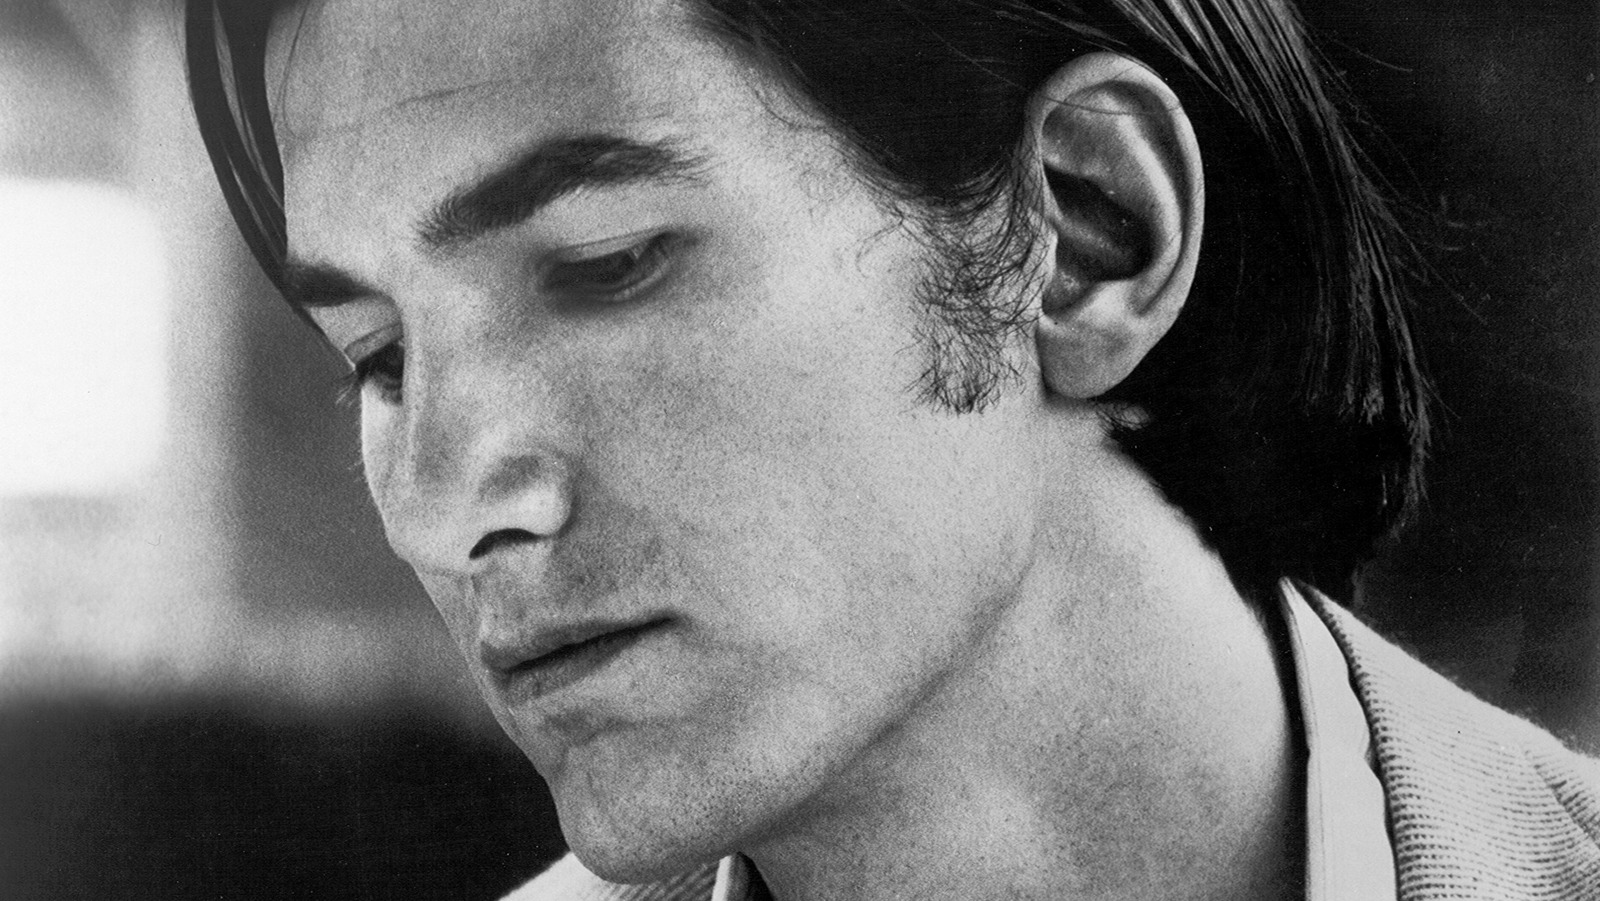 The Epic Story Behind Townes Van Zandt's Song Pancho And Lefty